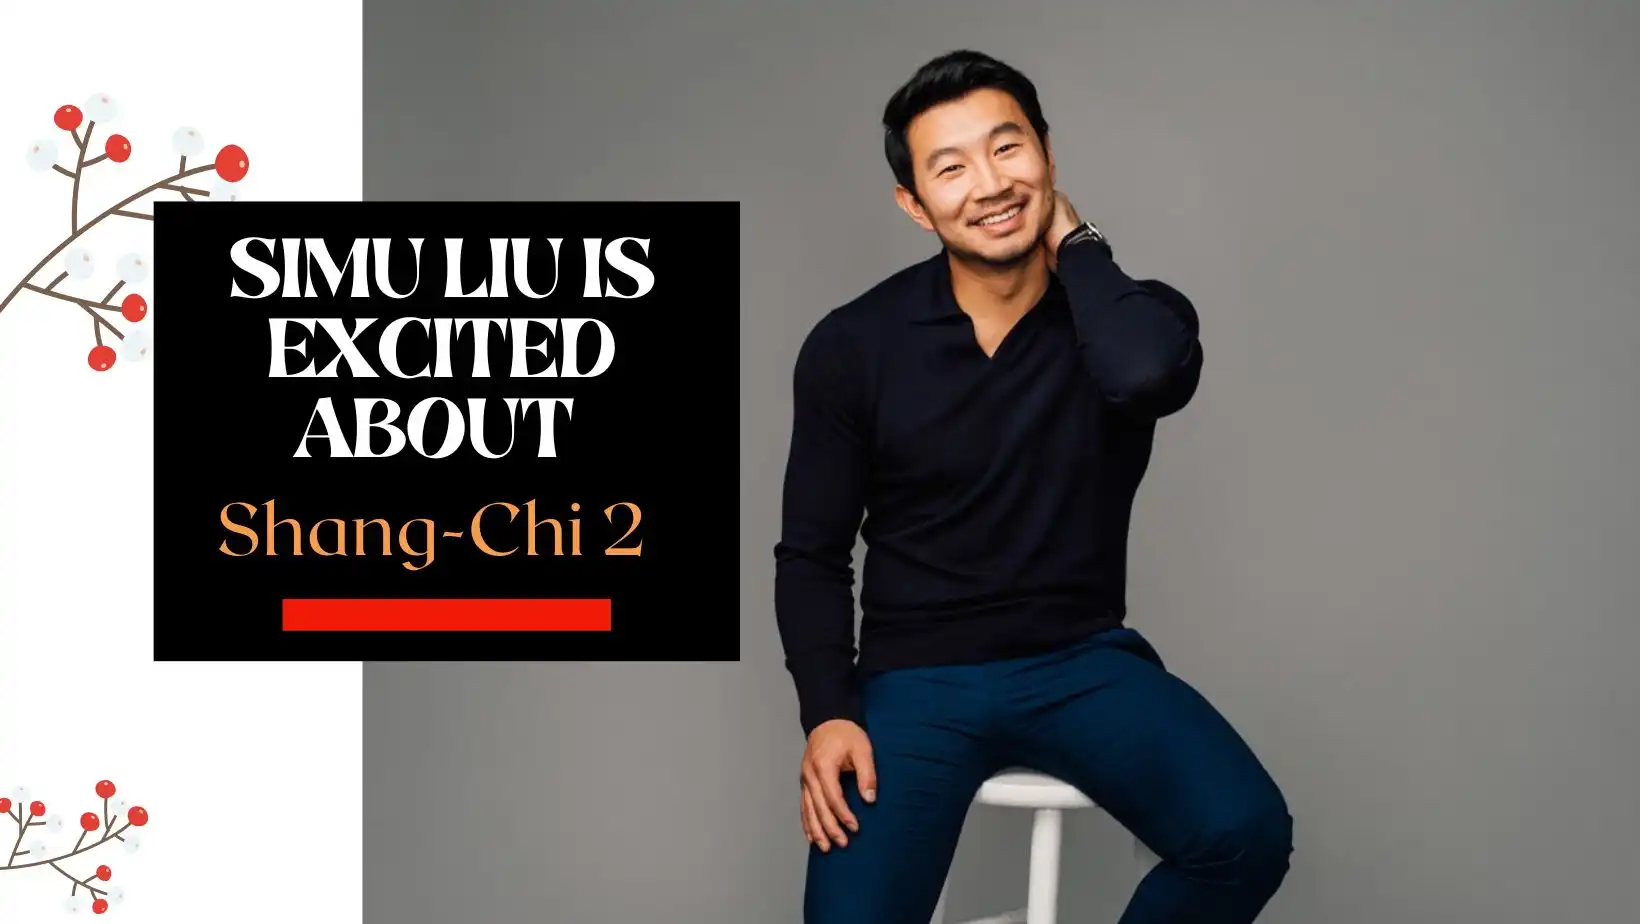 Simu Liu is Excited about Shang-Chi 2